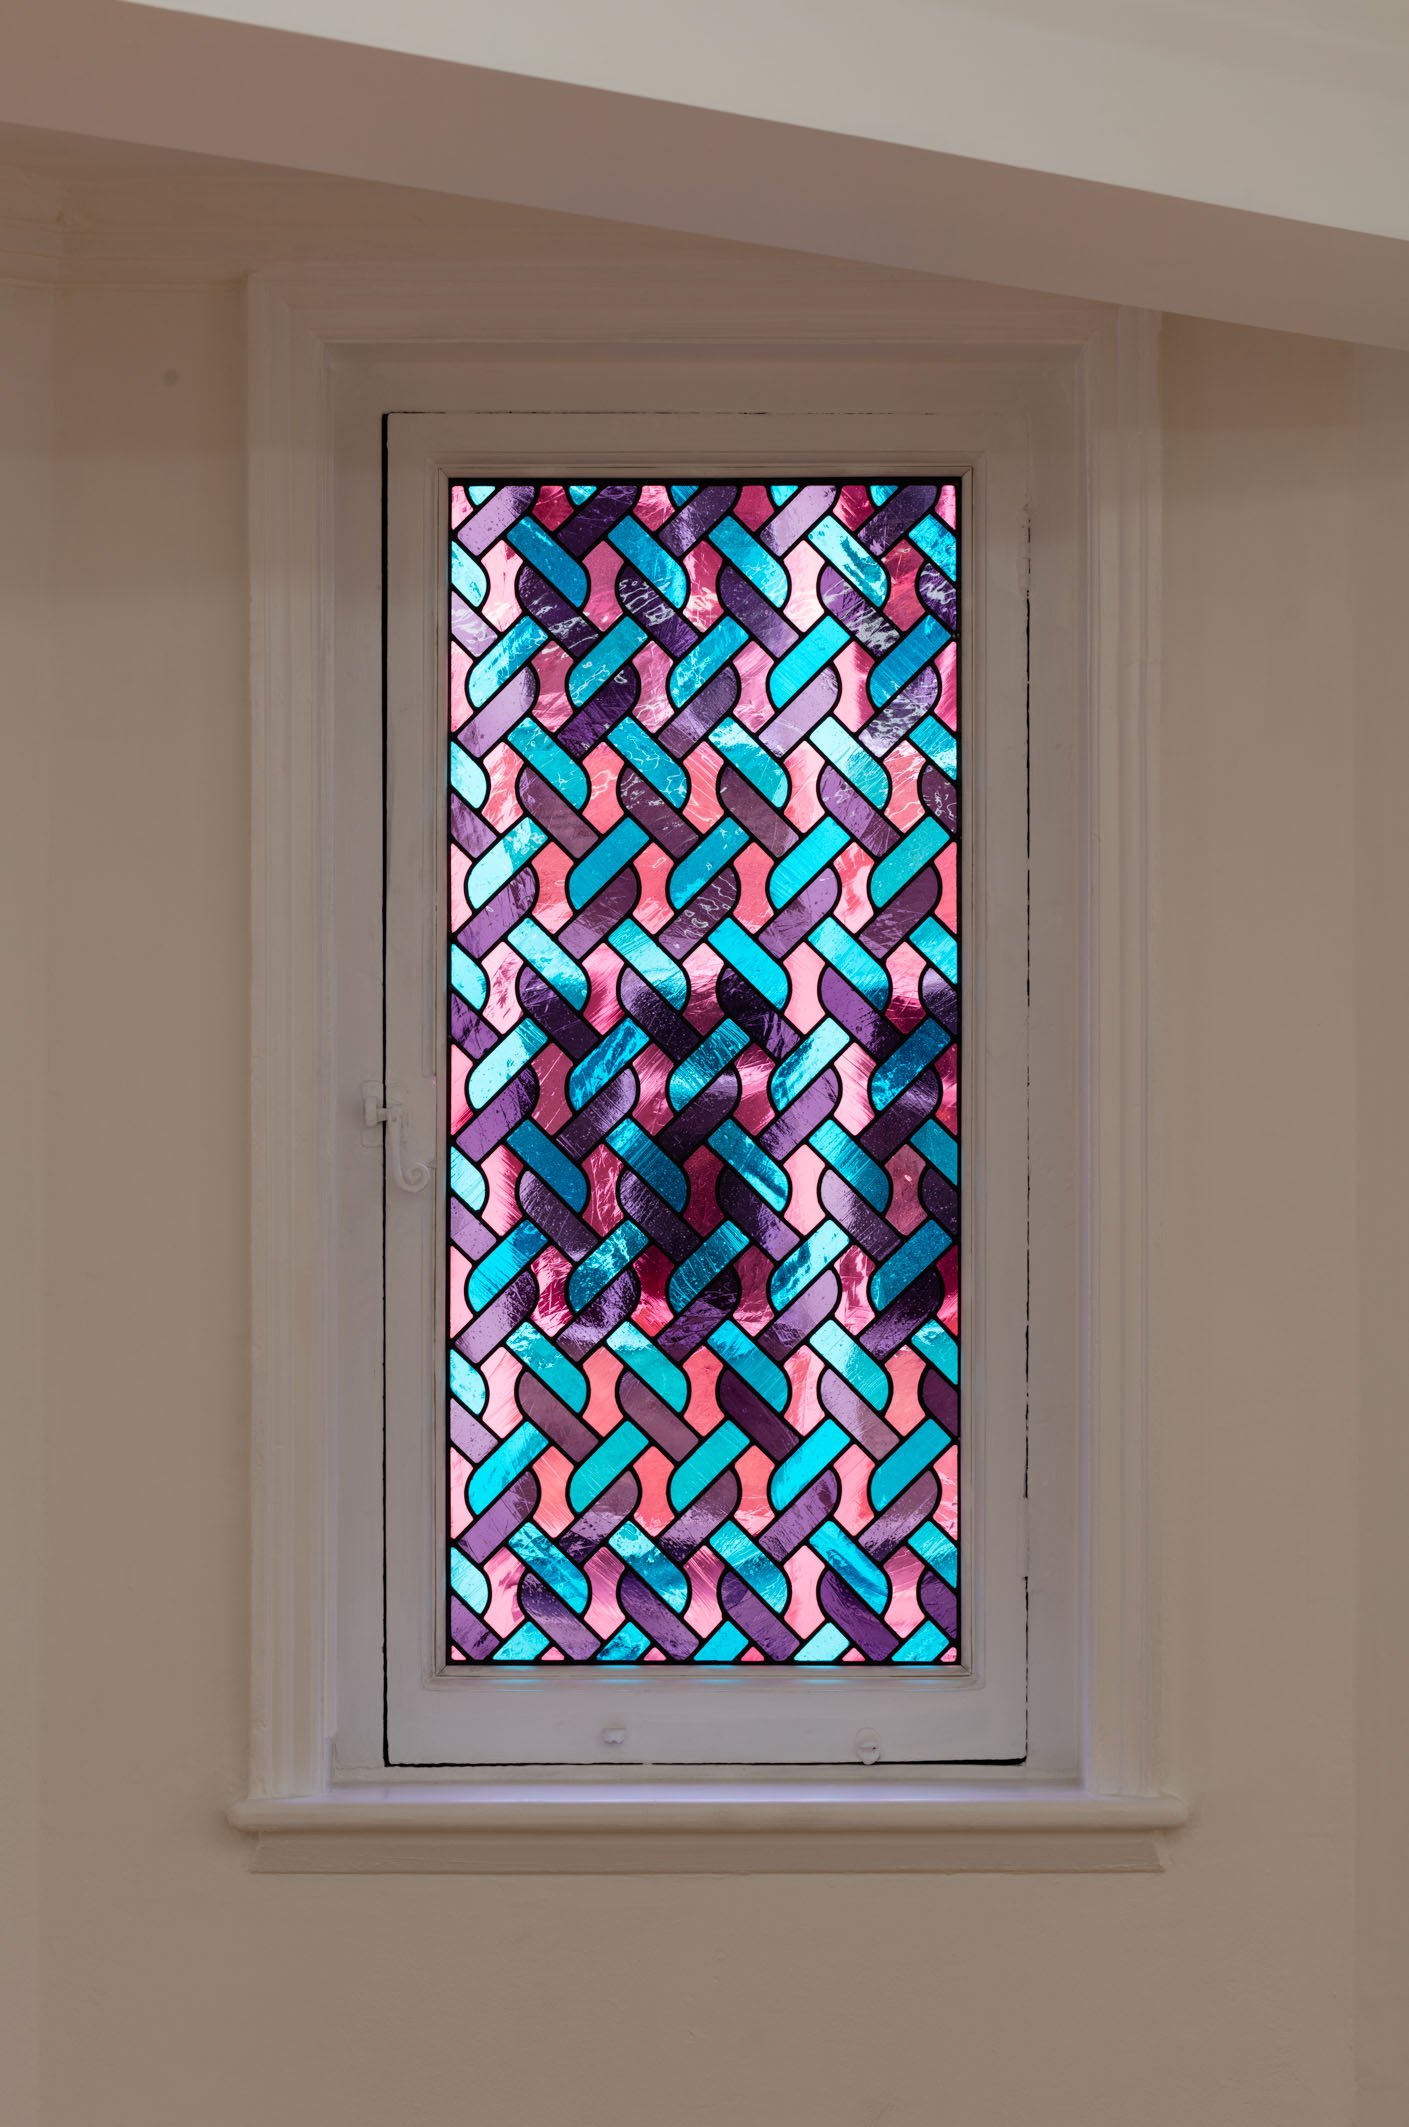 Christodoulos Panayiotou, Untitled, stained glass window, 122 x 52.5 cm (48 x 20 5/8 in), 2016